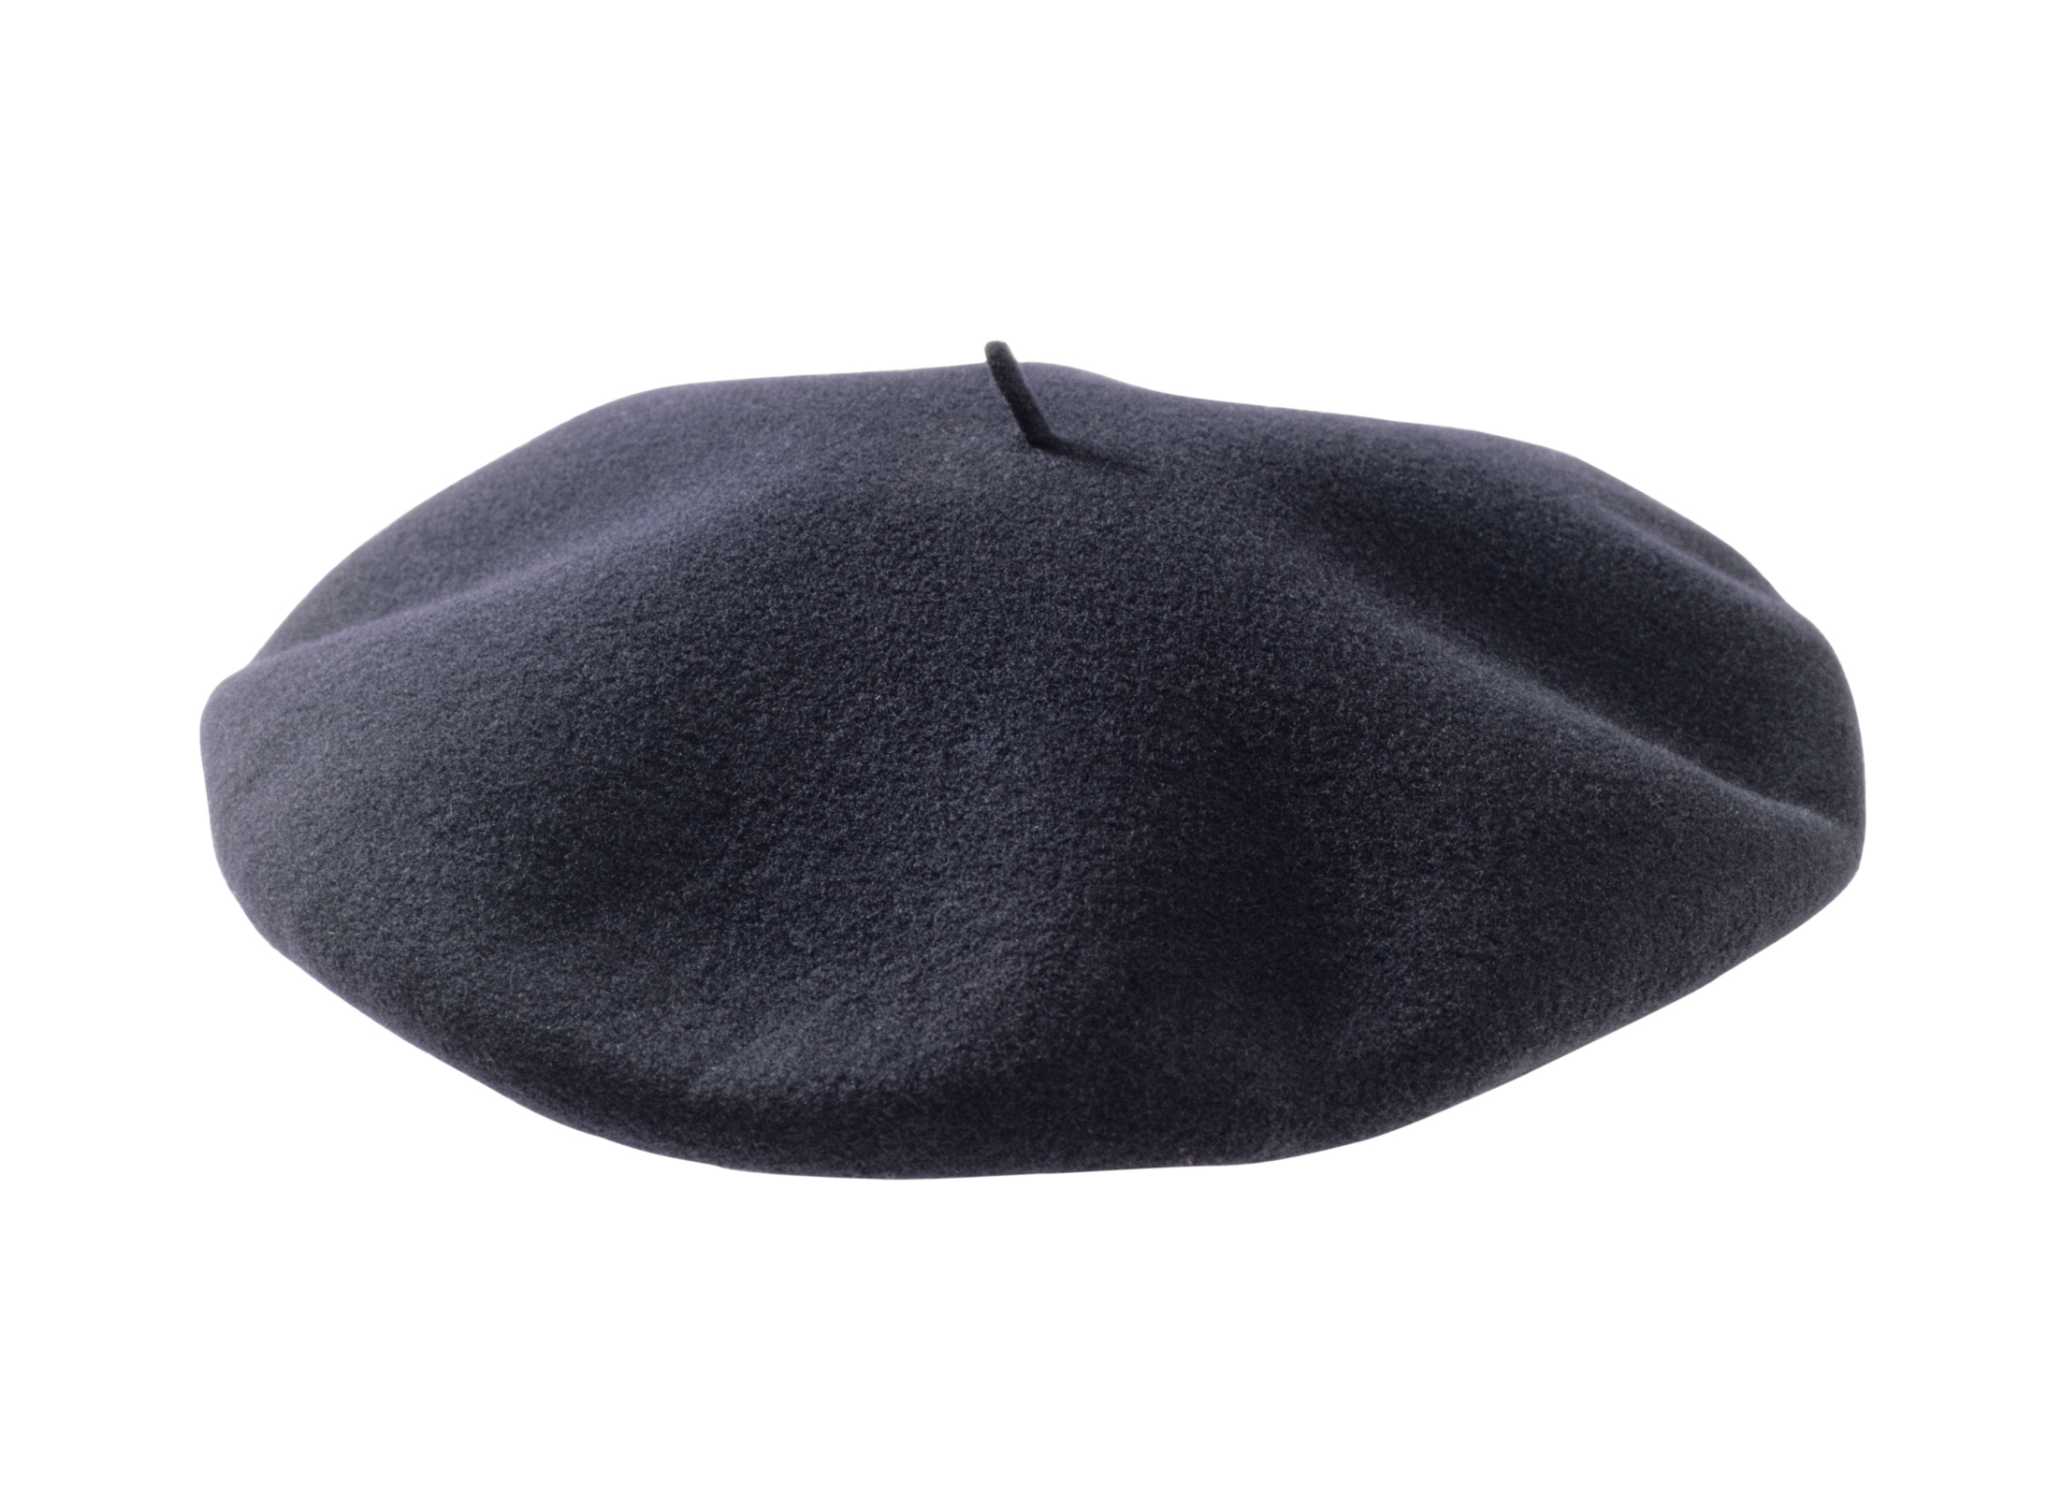 How to Clean Black Hats